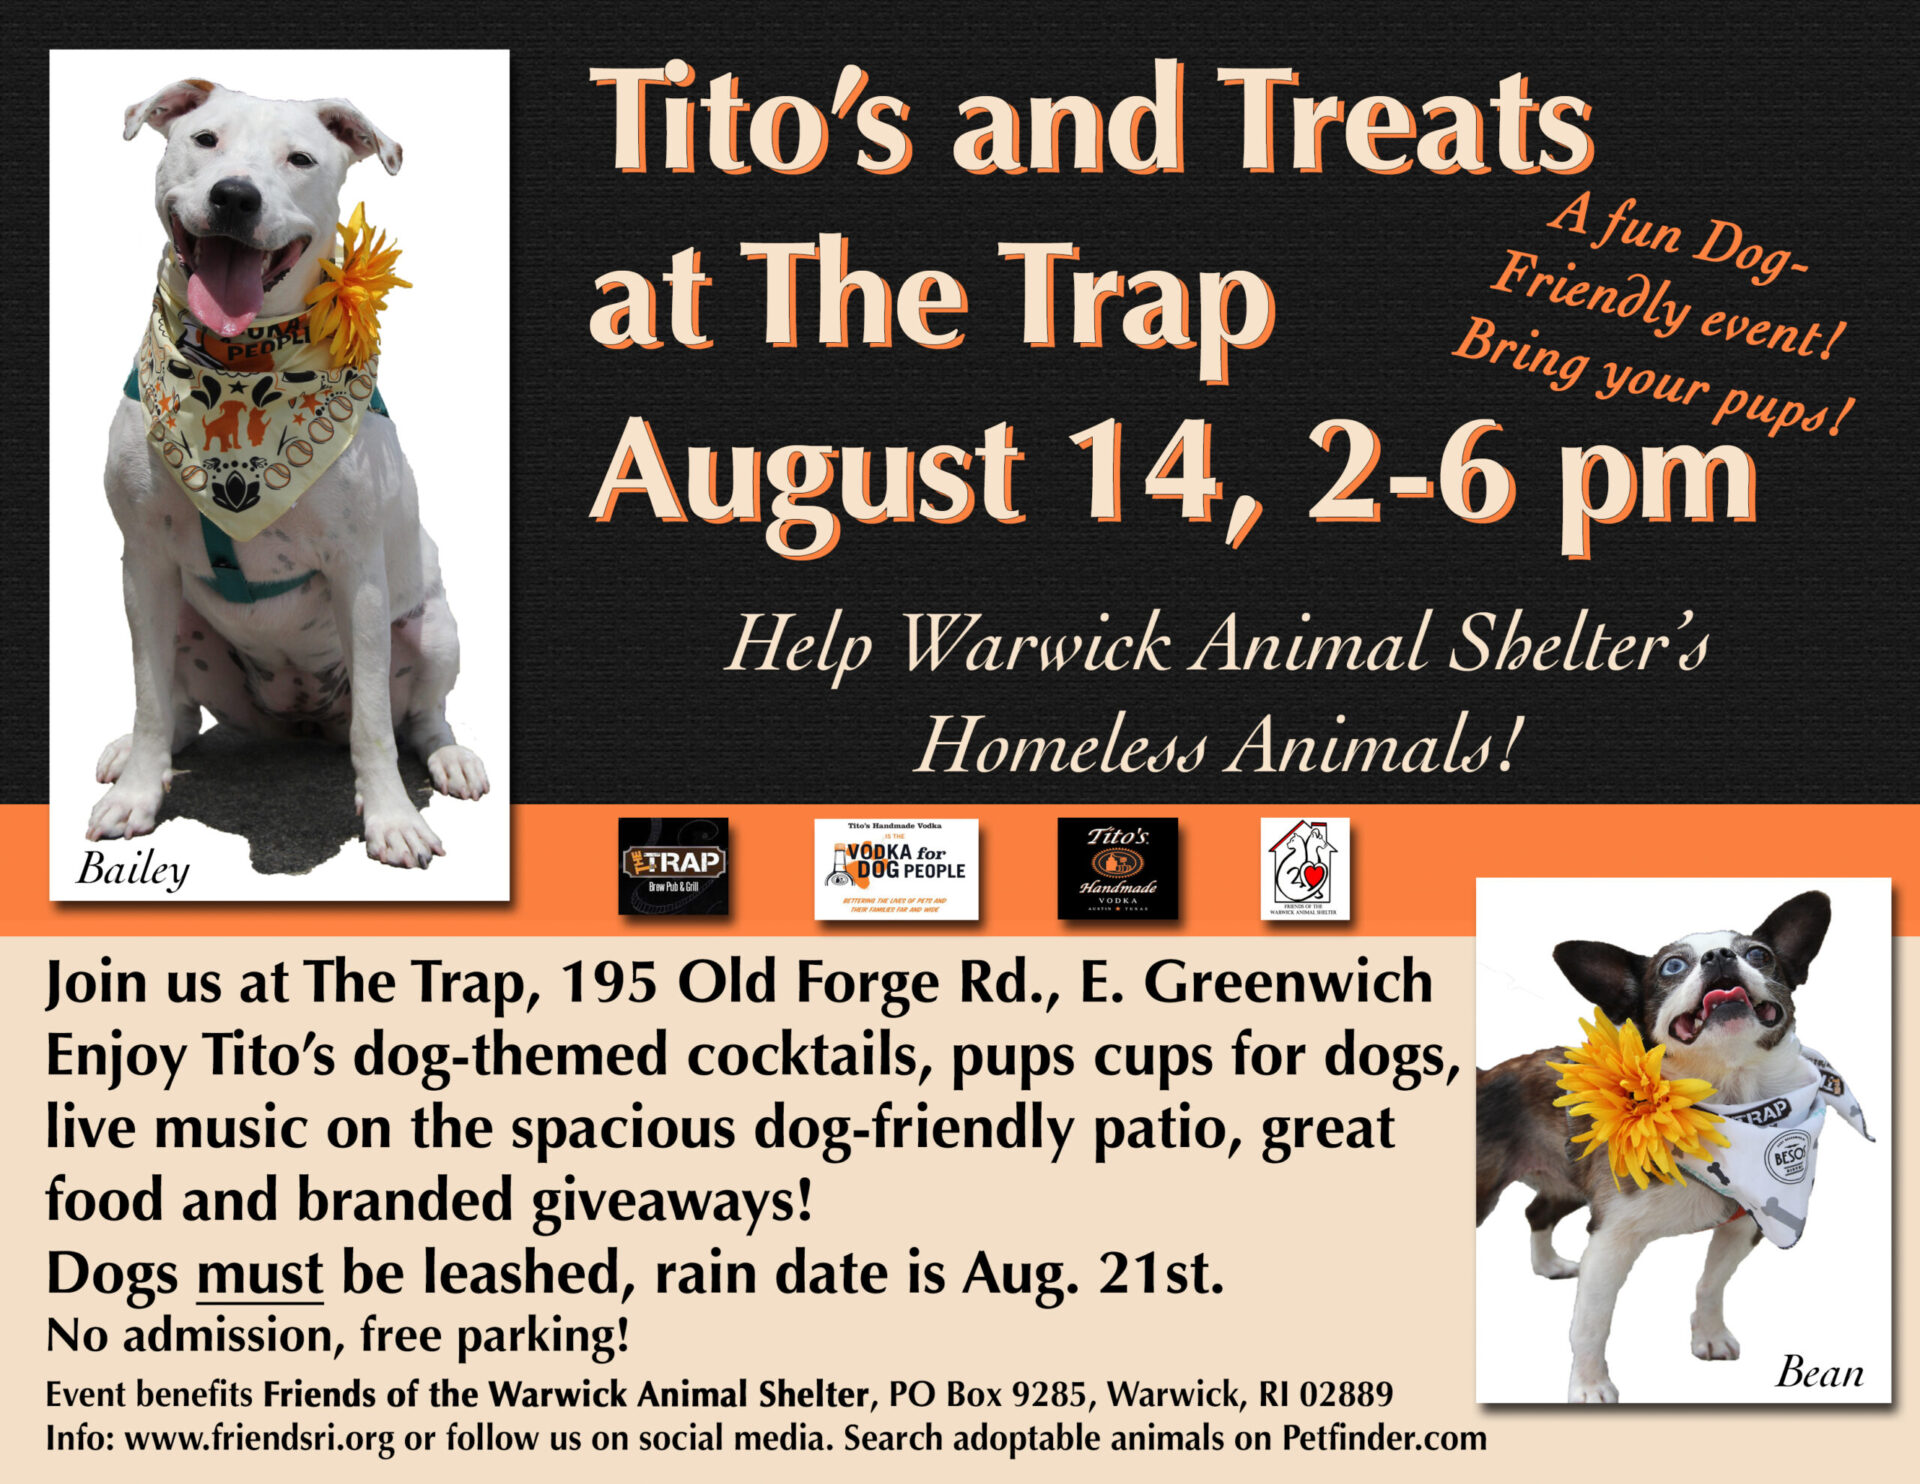 Titos & Treats At the Trap' Fundraiser Aids Warwick Animal Shelter -  